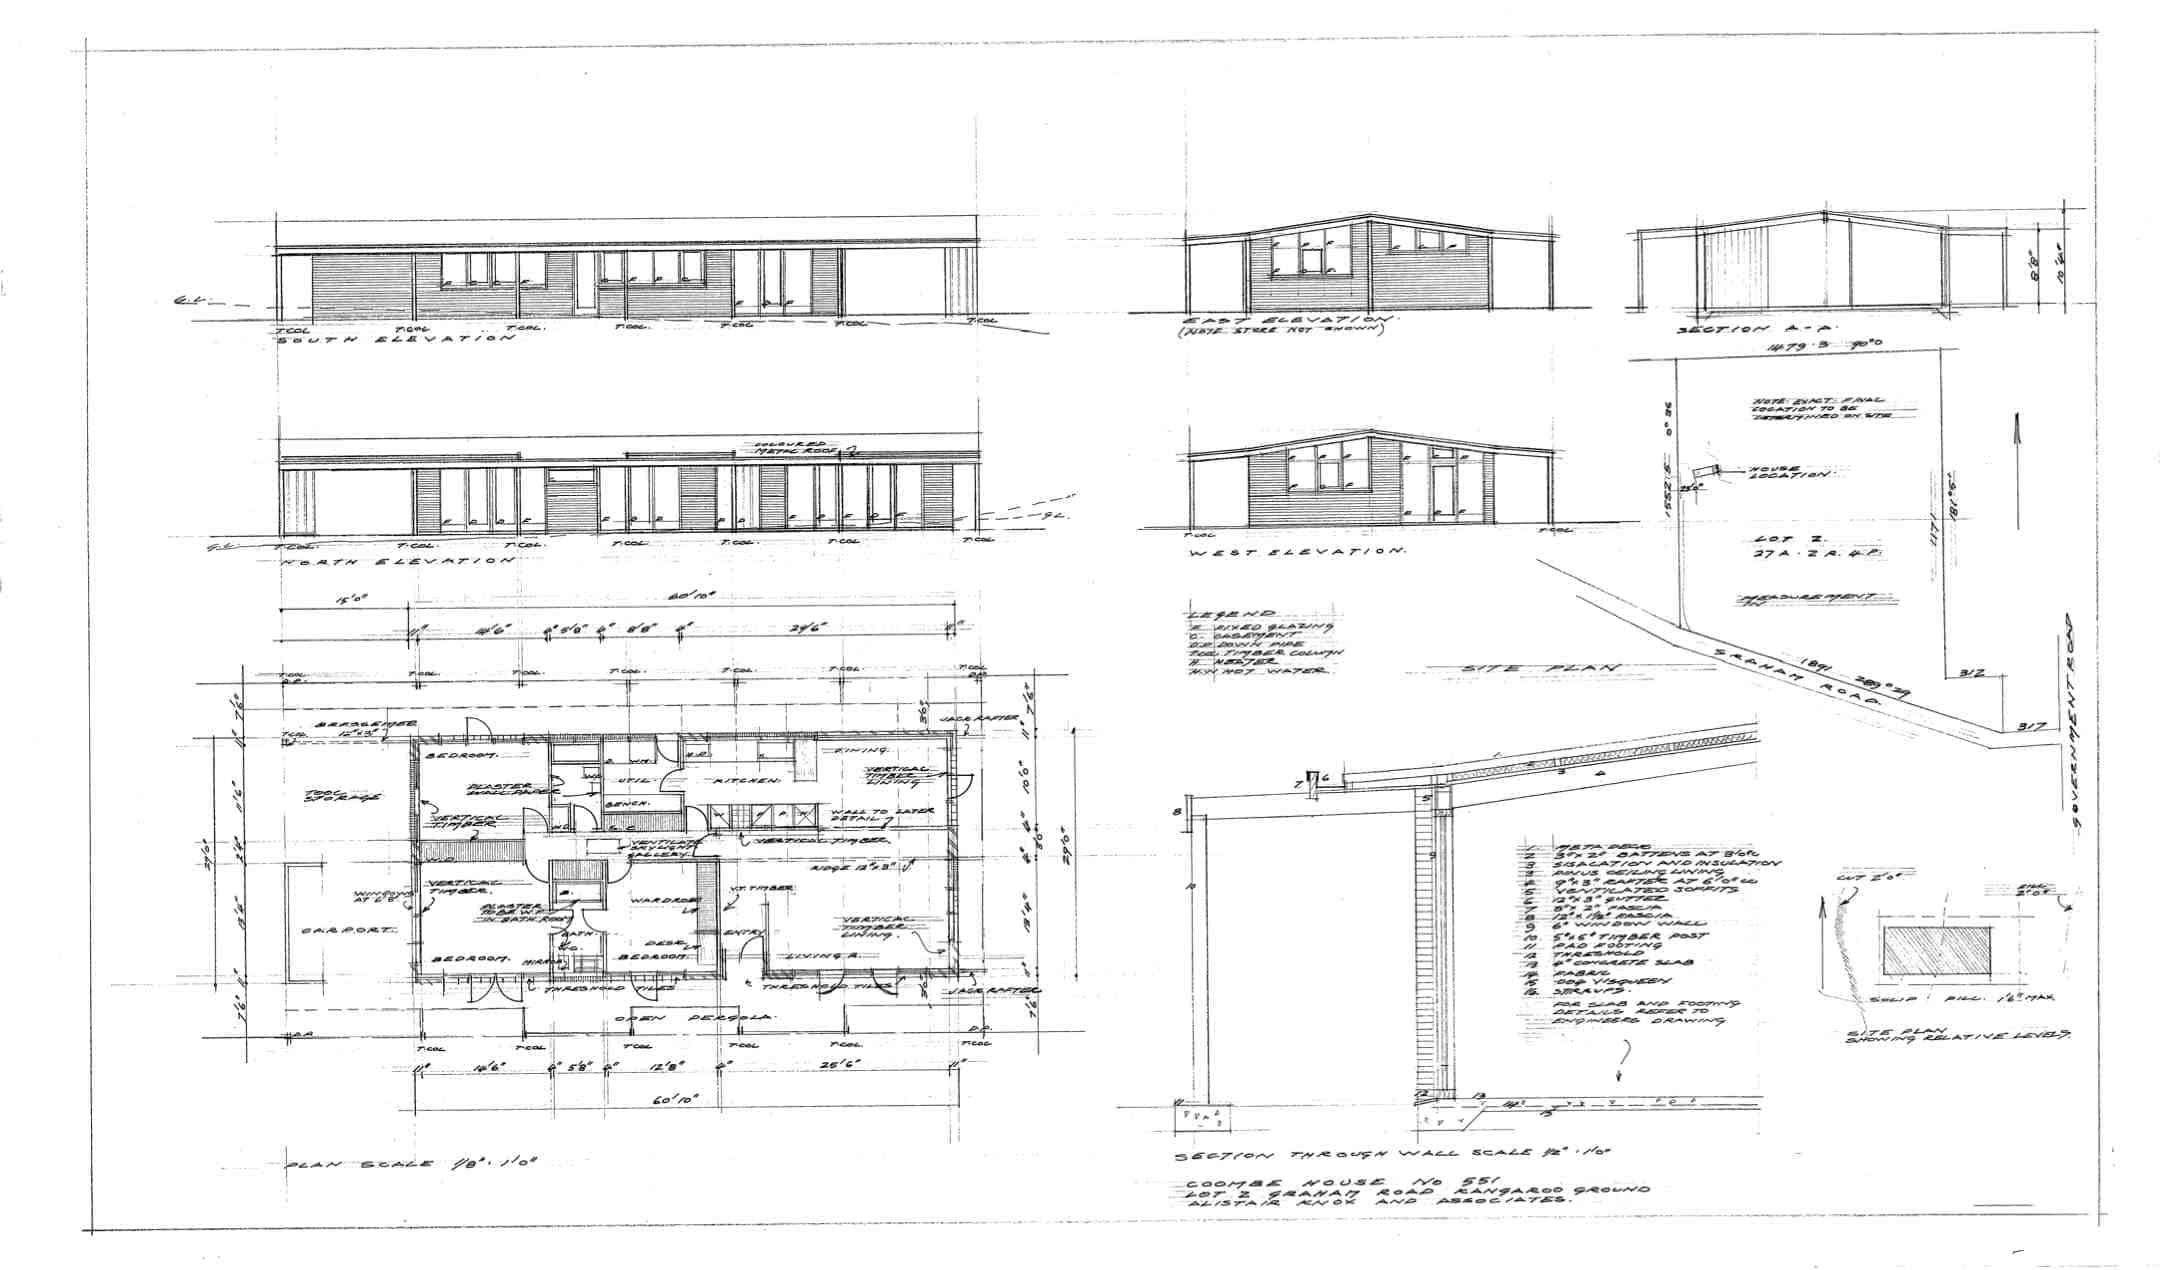 Coombe, 1: plan